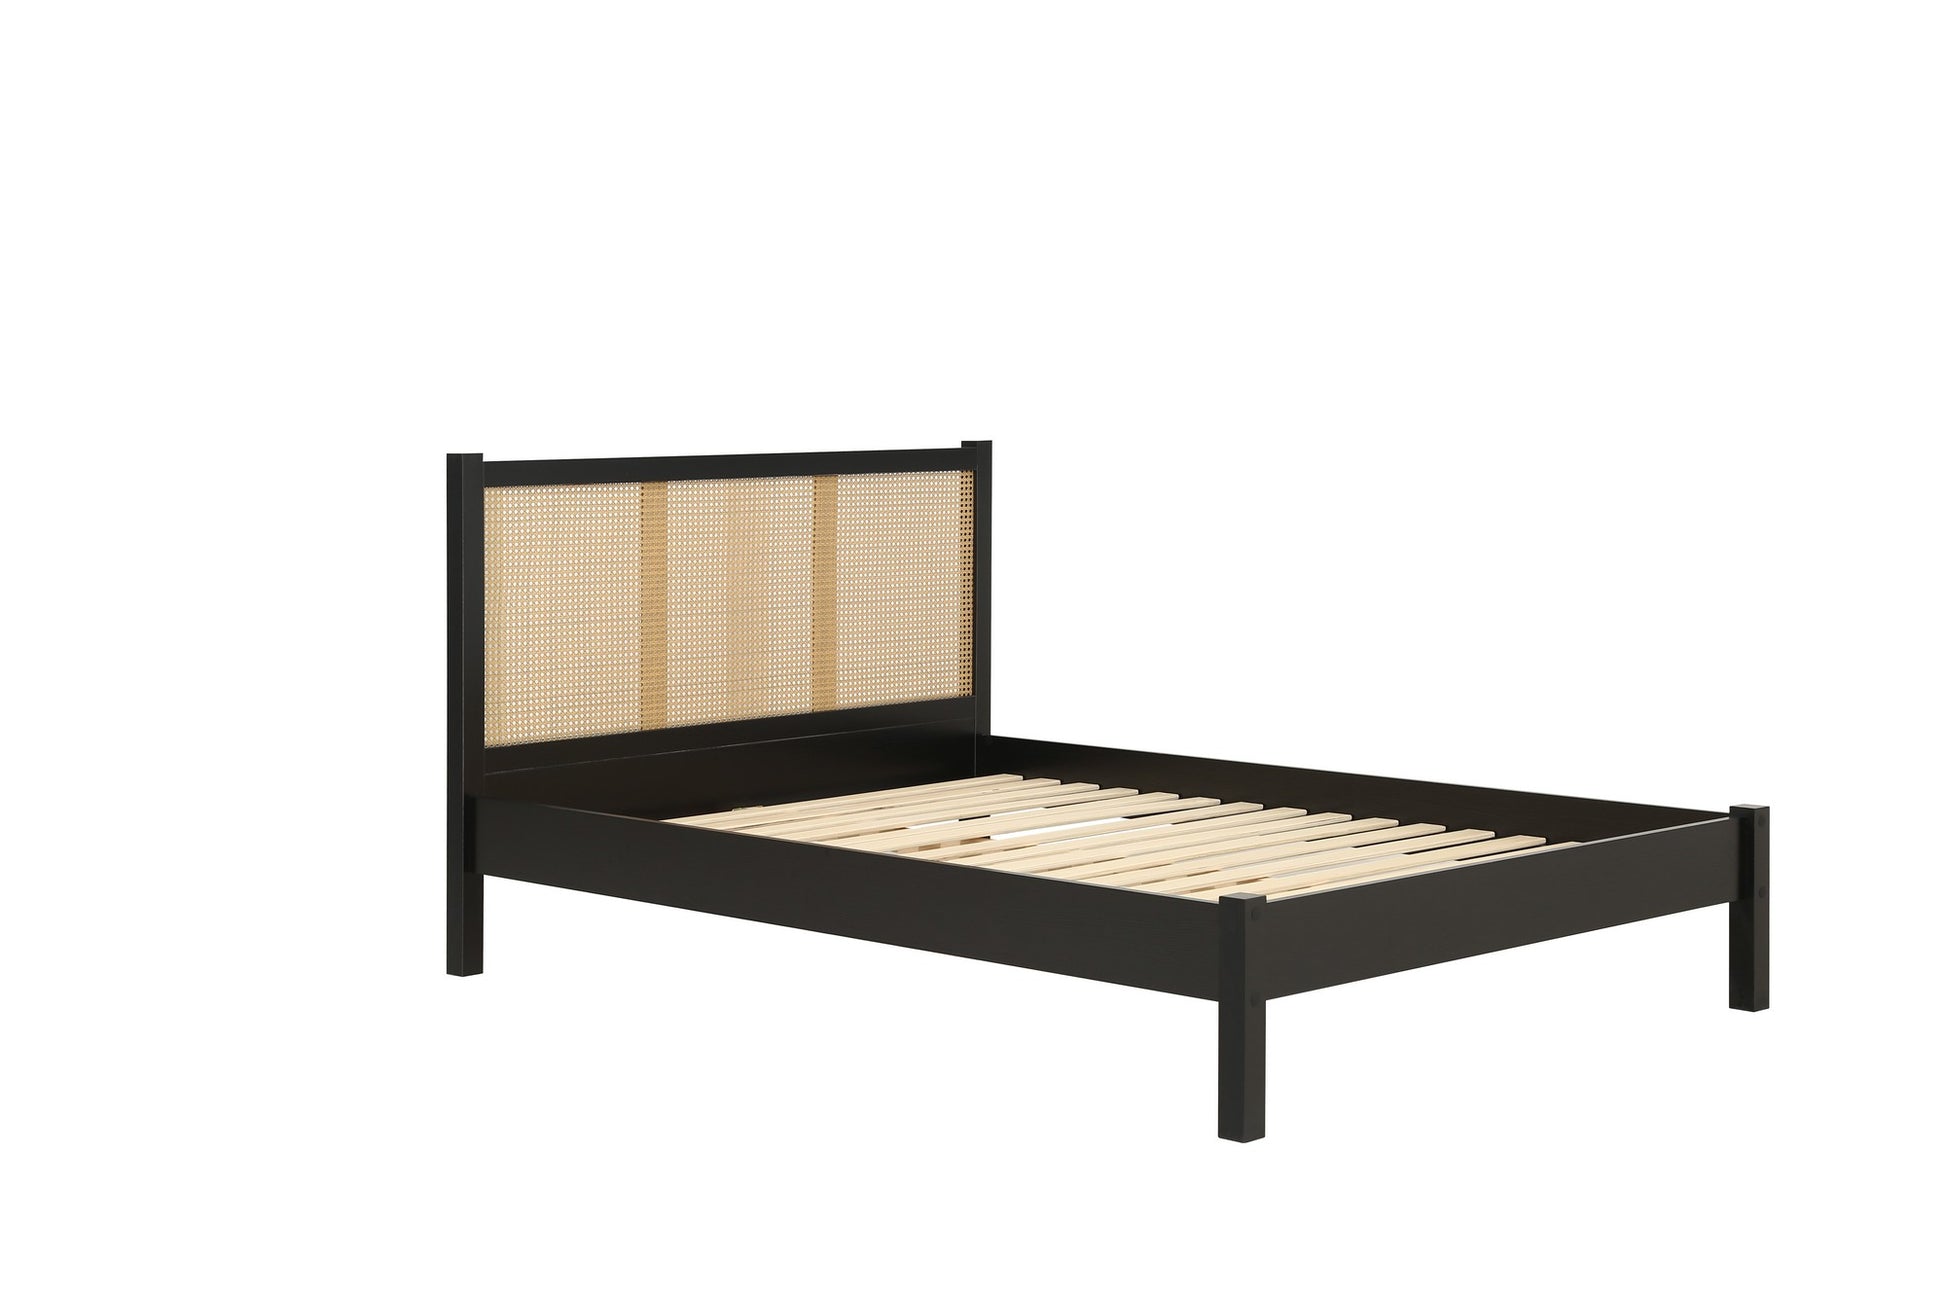 Croxley Rattan Bed - Classic Style with Solid Slats for Firmer Mattress, Ideal for Natural, Airy Bedroom Feel